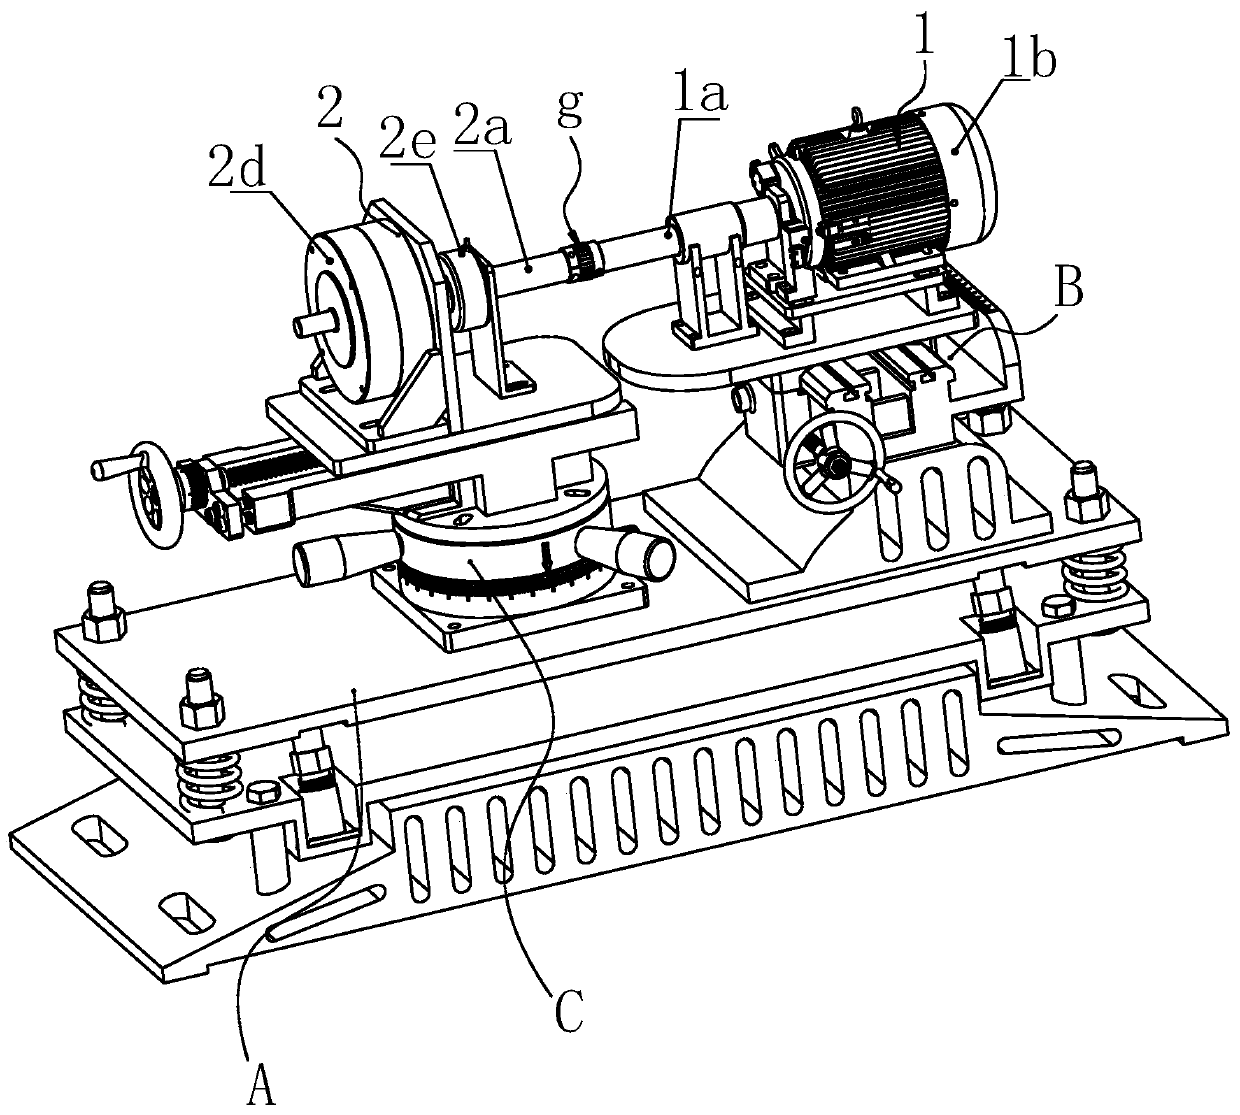 Service life detecting device of coupler